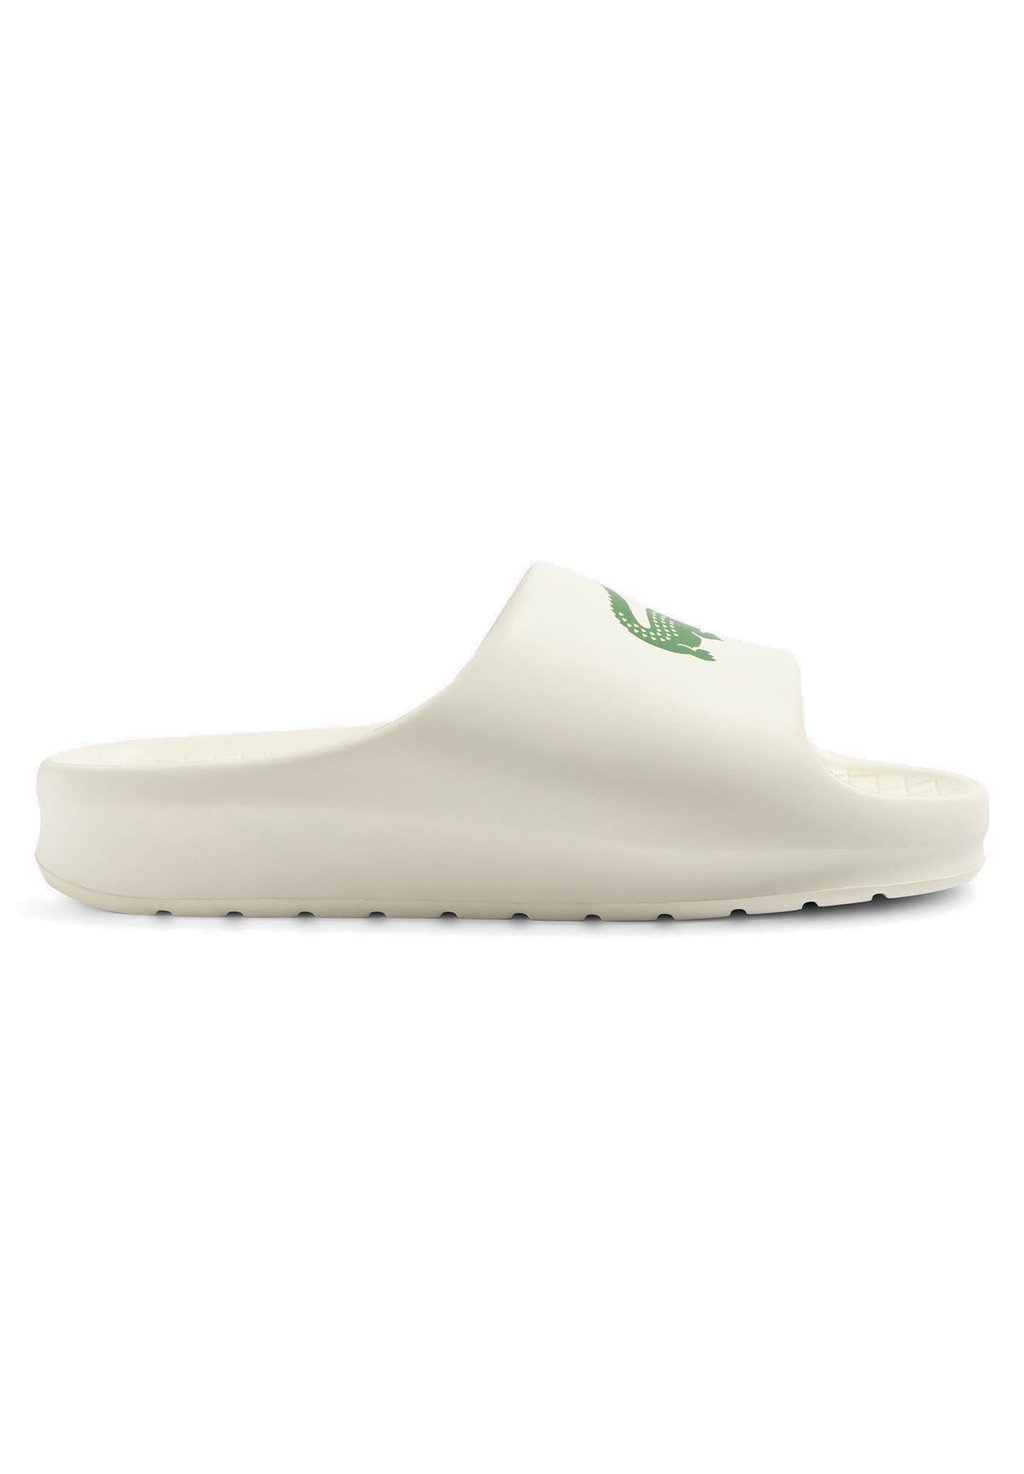 Шлепанцы Lacoste кроссовки lacoste zapatillas wht grn